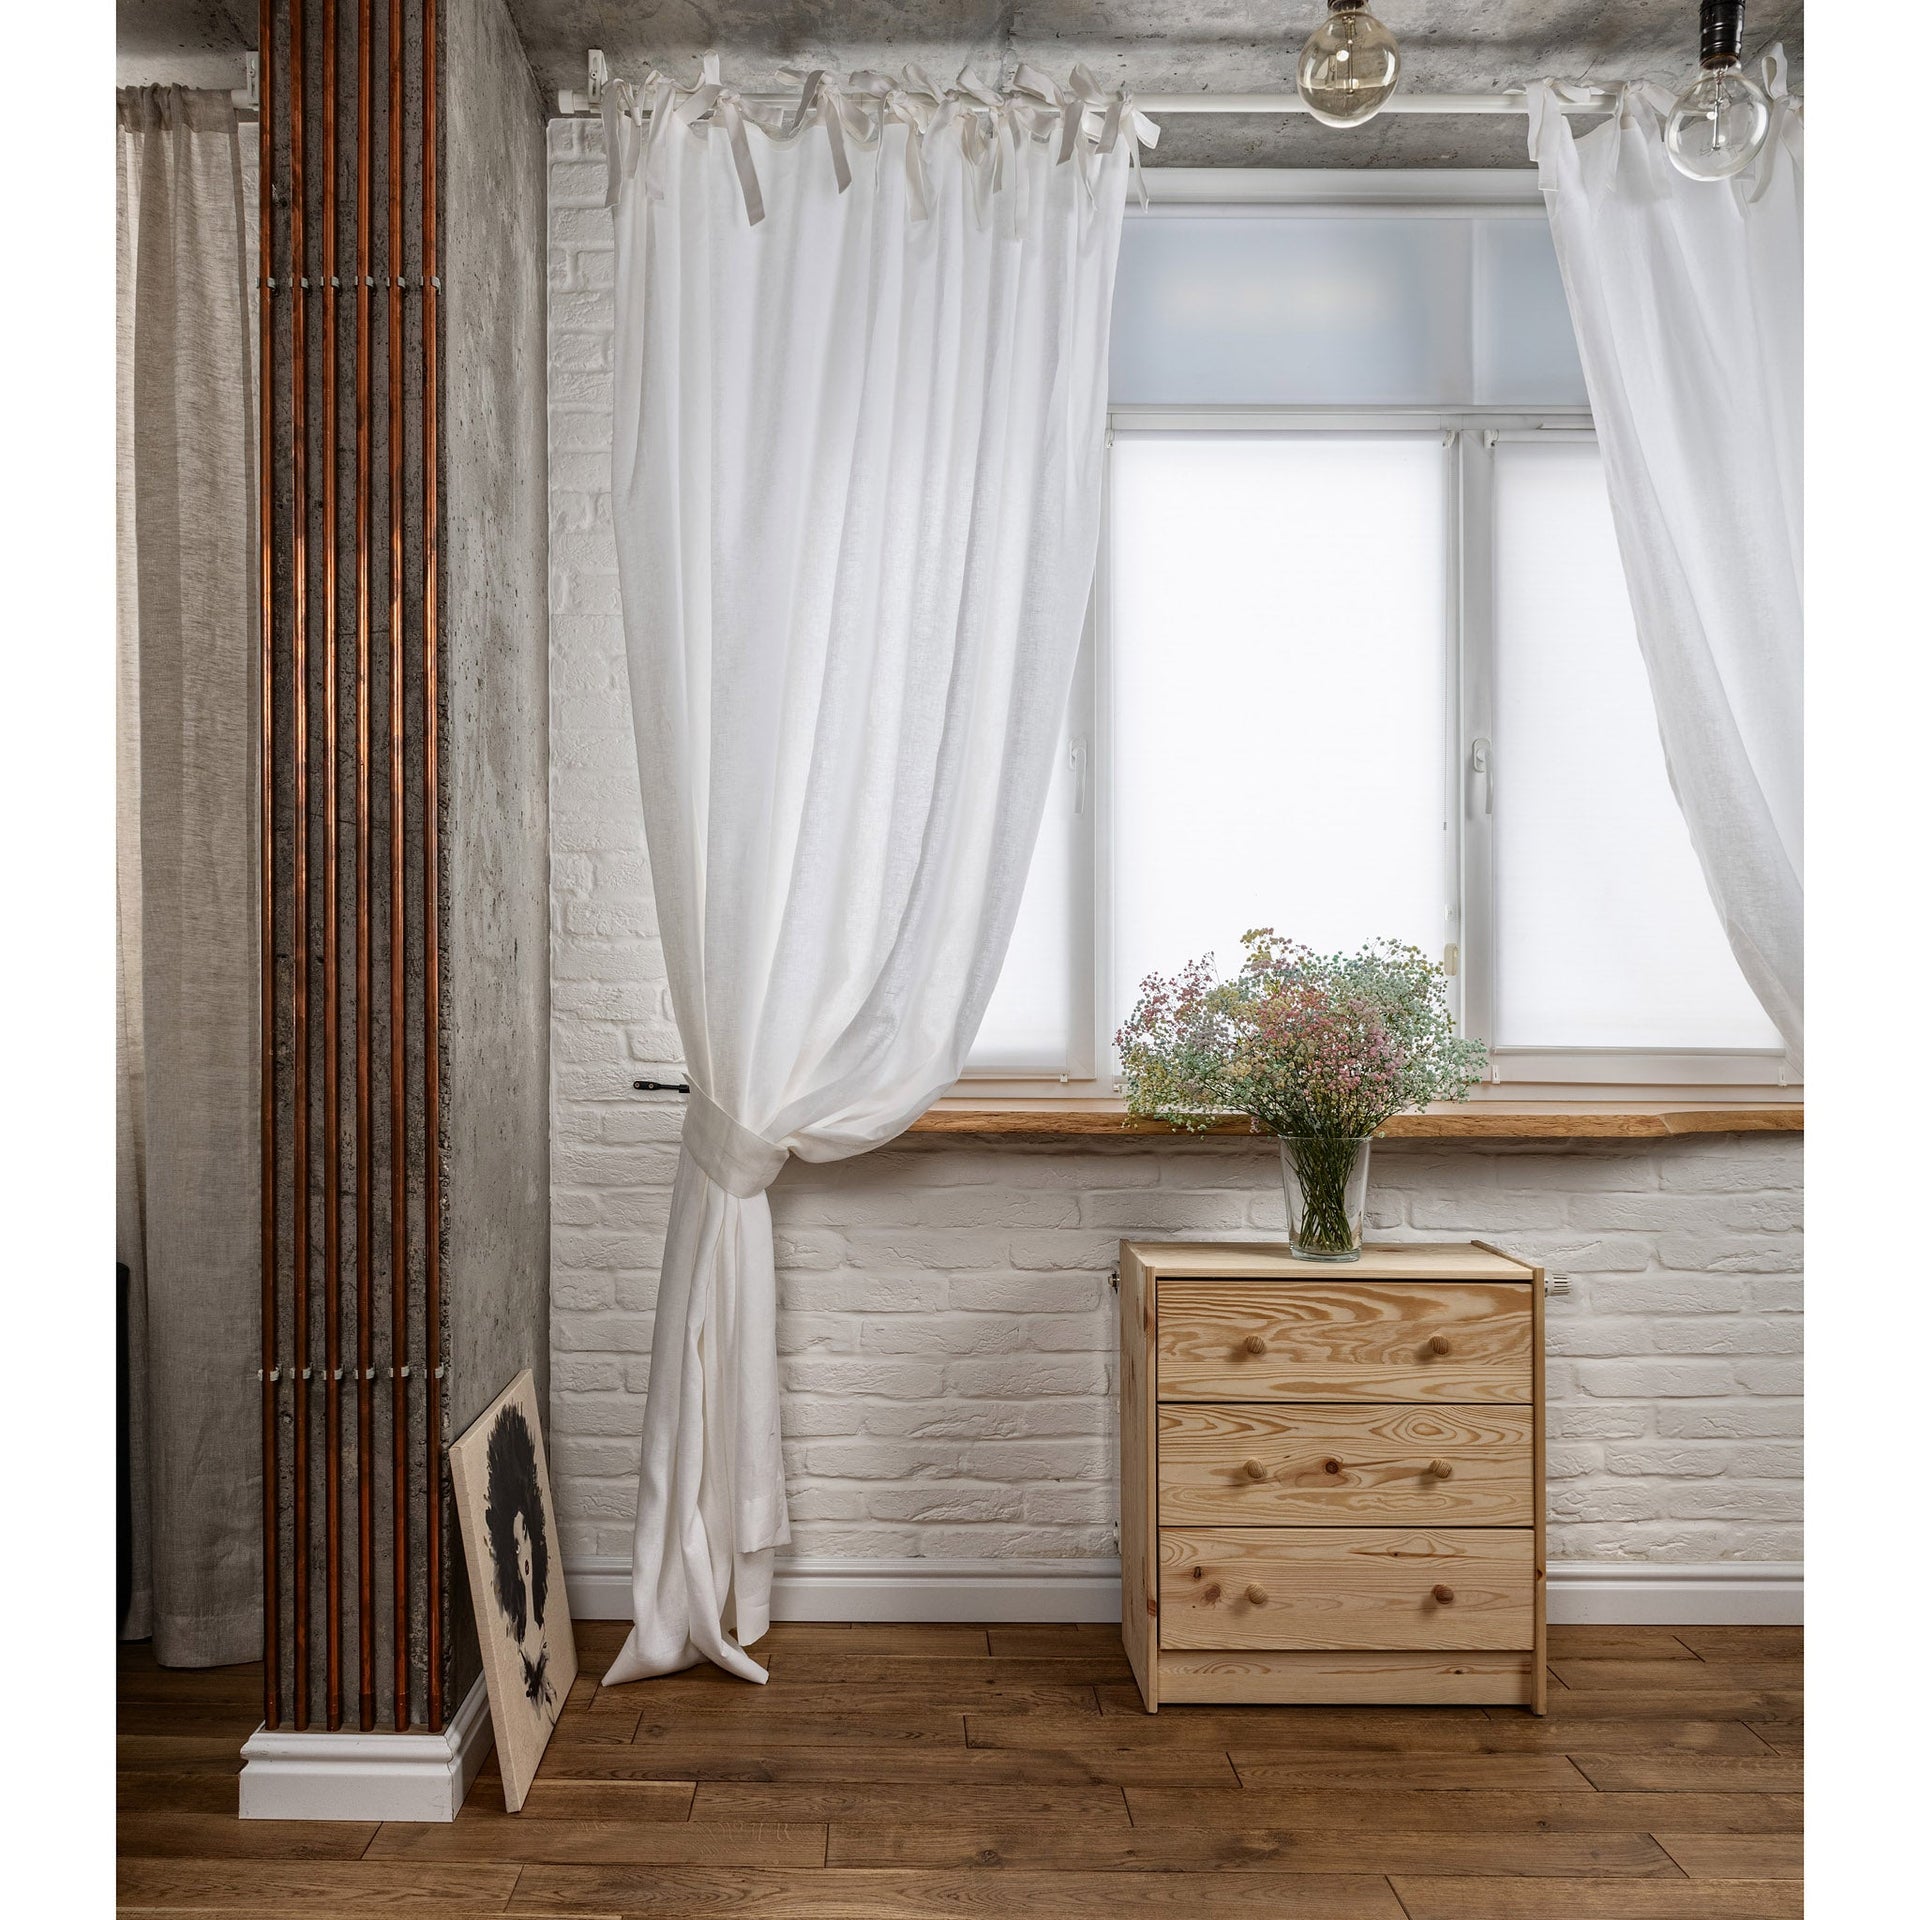 Top Ties Linen Curtains in White Color